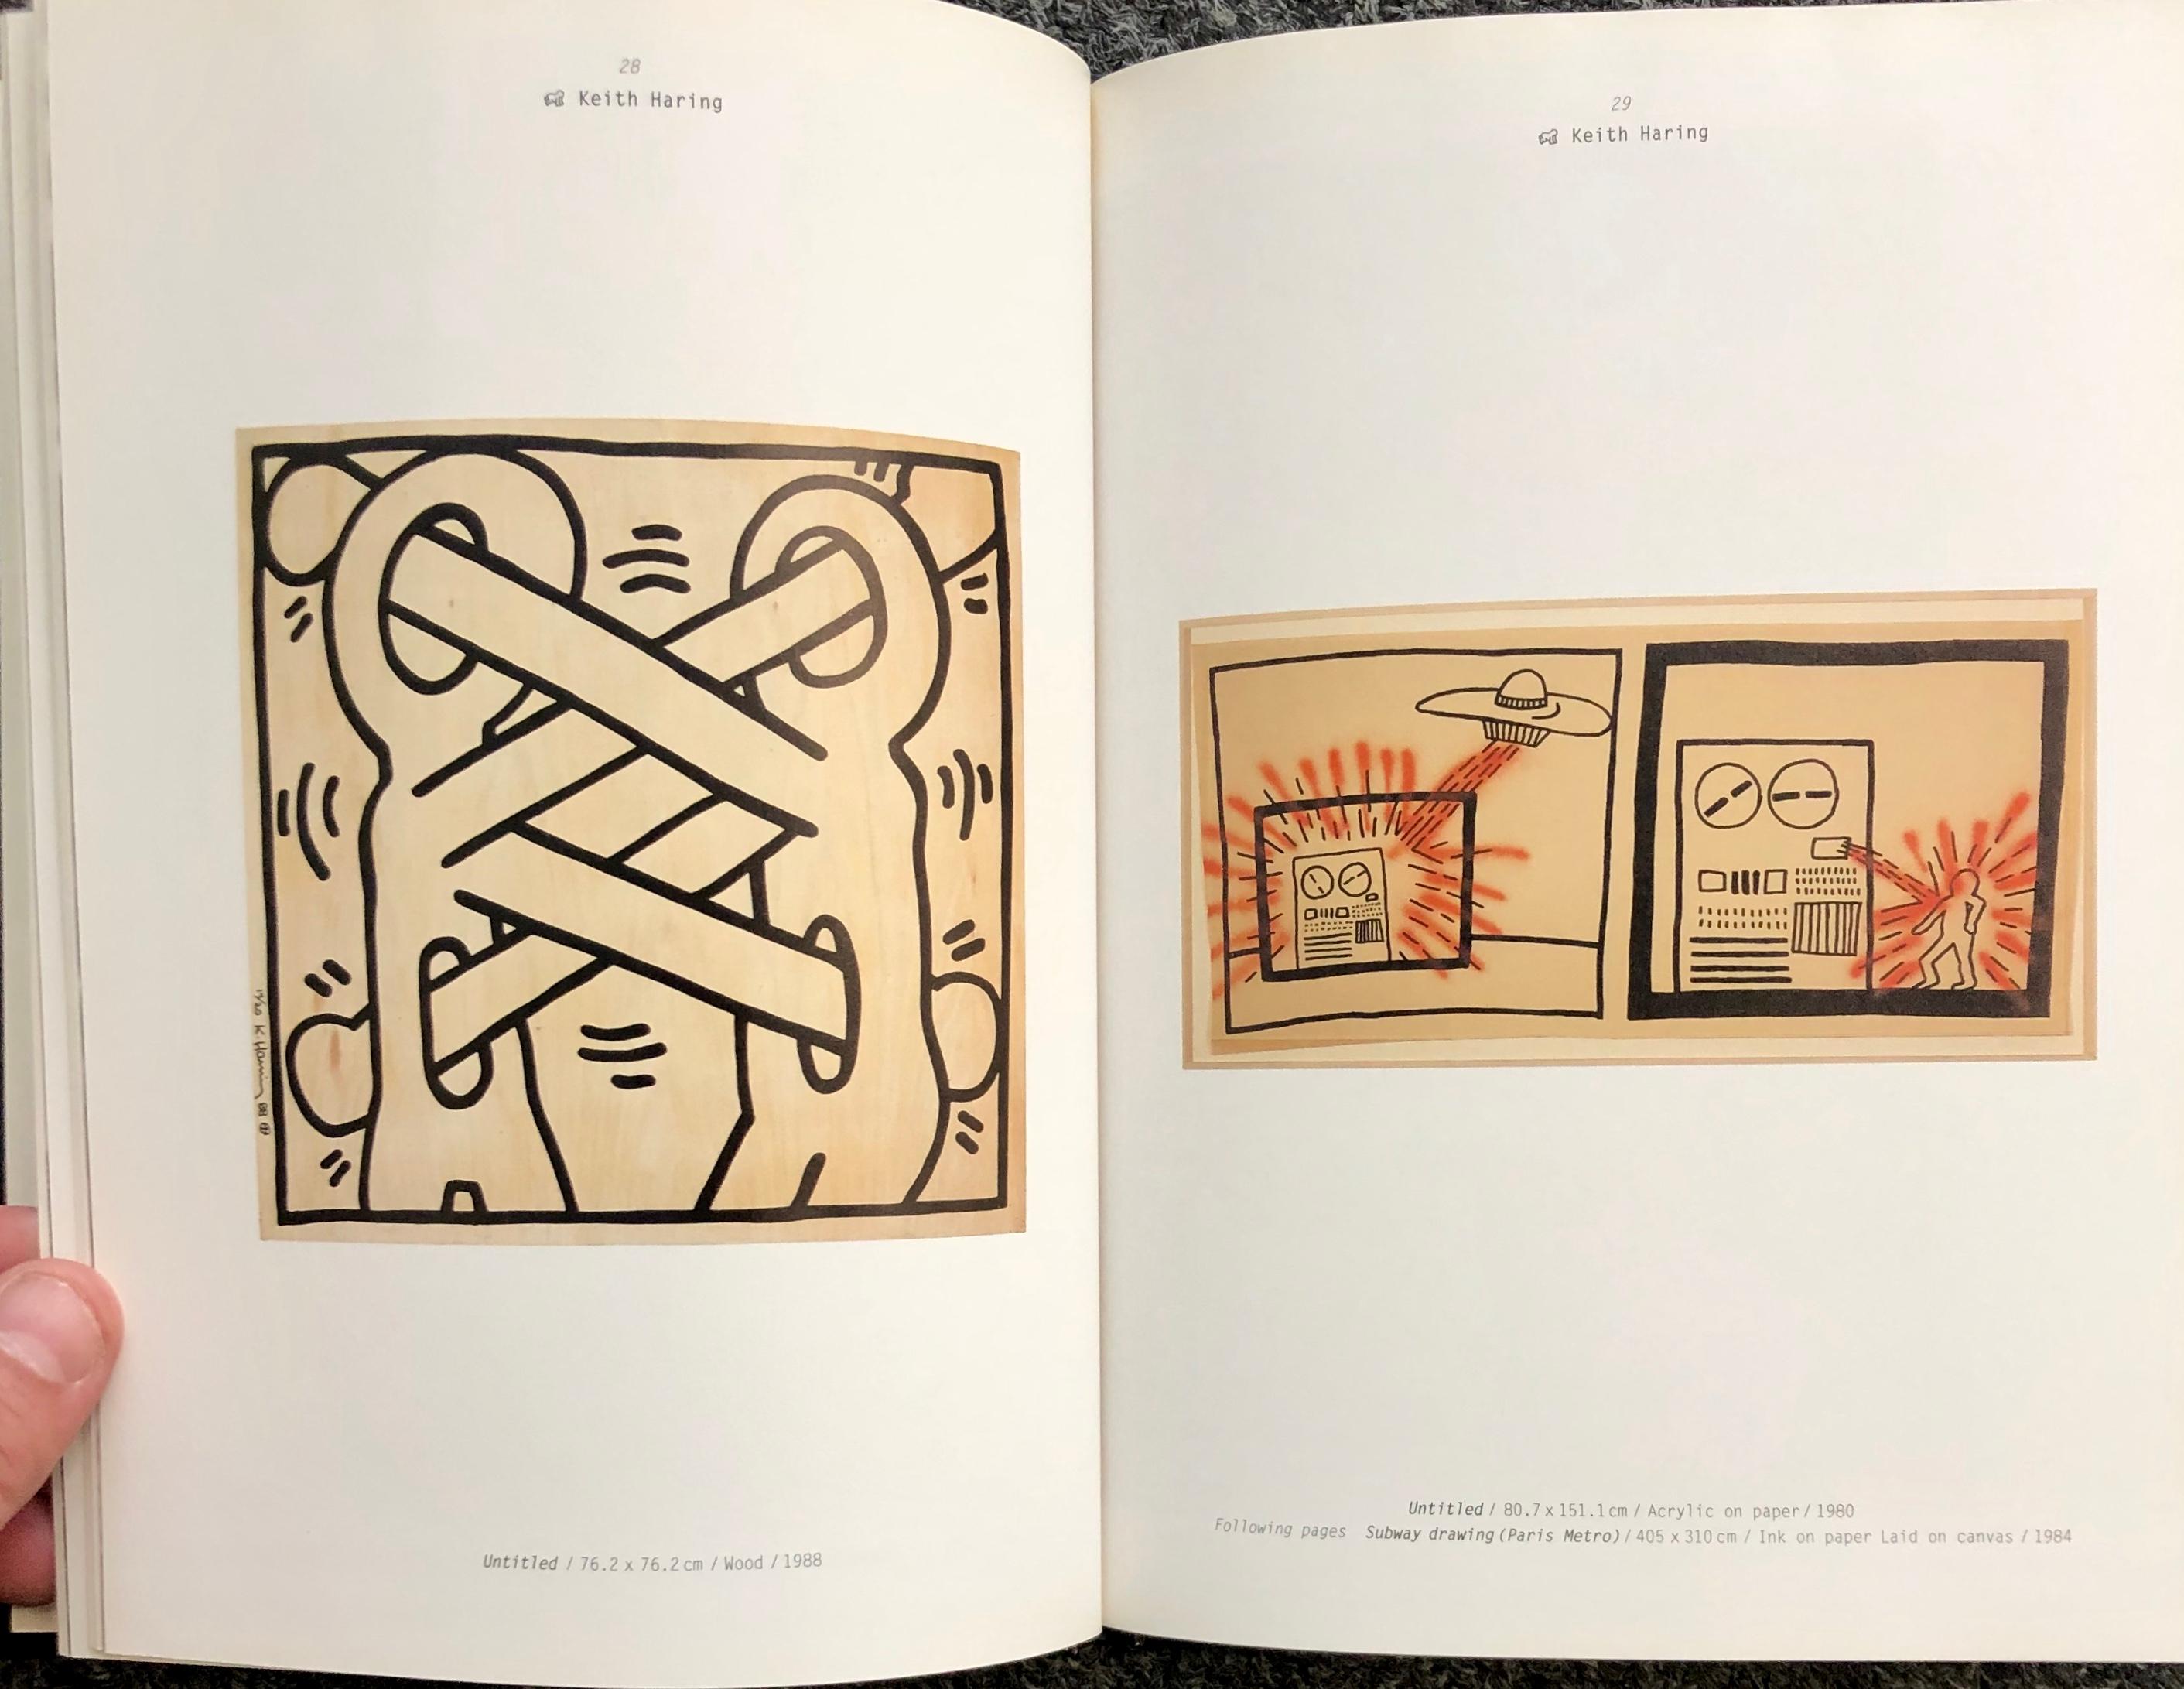 Paper Basquiat Keith Haring Kenny Scharf Catalogue, 1998